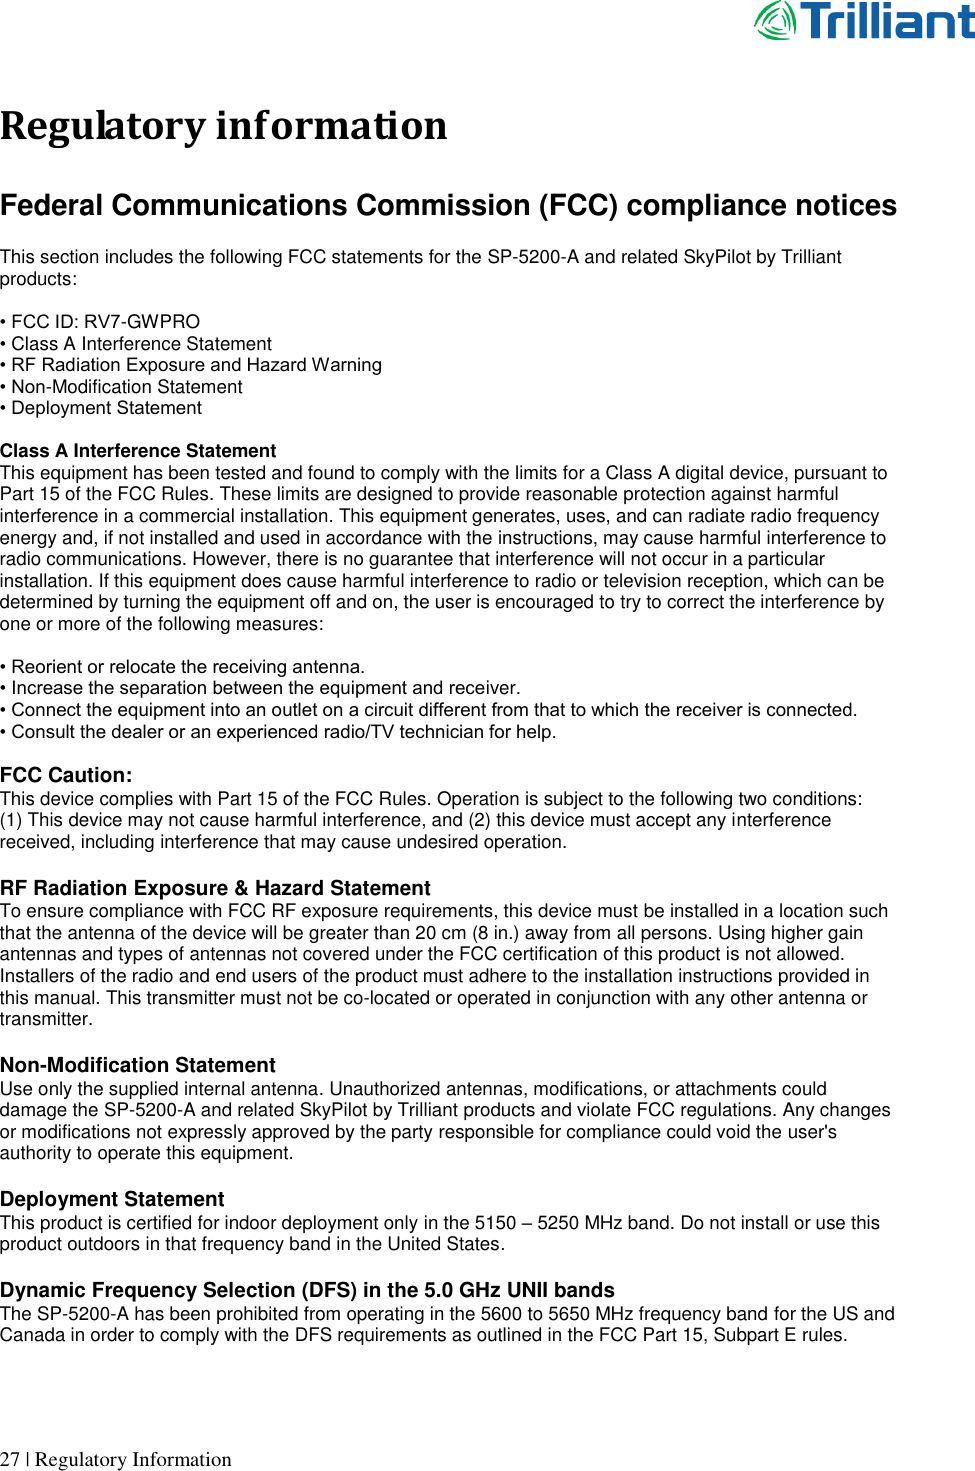      27 | Regulatory Information  Regulatory information  Federal Communications Commission (FCC) compliance notices  This section includes the following FCC statements for the SP-5200-A and related SkyPilot by Trilliant products:  • FCC ID: RV7-GWPRO • Class A Interference Statement • RF Radiation Exposure and Hazard Warning • Non-Modification Statement • Deployment Statement  Class A Interference Statement This equipment has been tested and found to comply with the limits for a Class A digital device, pursuant to Part 15 of the FCC Rules. These limits are designed to provide reasonable protection against harmful interference in a commercial installation. This equipment generates, uses, and can radiate radio frequency energy and, if not installed and used in accordance with the instructions, may cause harmful interference to radio communications. However, there is no guarantee that interference will not occur in a particular installation. If this equipment does cause harmful interference to radio or television reception, which can be determined by turning the equipment off and on, the user is encouraged to try to correct the interference by one or more of the following measures:  • Reorient or relocate the receiving antenna. • Increase the separation between the equipment and receiver. • Connect the equipment into an outlet on a circuit different from that to which the receiver is connected. • Consult the dealer or an experienced radio/TV technician for help.  FCC Caution: This device complies with Part 15 of the FCC Rules. Operation is subject to the following two conditions:    (1) This device may not cause harmful interference, and (2) this device must accept any interference received, including interference that may cause undesired operation.  RF Radiation Exposure &amp; Hazard Statement To ensure compliance with FCC RF exposure requirements, this device must be installed in a location such that the antenna of the device will be greater than 20 cm (8 in.) away from all persons. Using higher gain antennas and types of antennas not covered under the FCC certification of this product is not allowed. Installers of the radio and end users of the product must adhere to the installation instructions provided in this manual. This transmitter must not be co-located or operated in conjunction with any other antenna or transmitter.  Non-Modification Statement Use only the supplied internal antenna. Unauthorized antennas, modifications, or attachments could damage the SP-5200-A and related SkyPilot by Trilliant products and violate FCC regulations. Any changes or modifications not expressly approved by the party responsible for compliance could void the user&apos;s authority to operate this equipment.  Deployment Statement This product is certified for indoor deployment only in the 5150 – 5250 MHz band. Do not install or use this product outdoors in that frequency band in the United States.  Dynamic Frequency Selection (DFS) in the 5.0 GHz UNII bands The SP-5200-A has been prohibited from operating in the 5600 to 5650 MHz frequency band for the US and Canada in order to comply with the DFS requirements as outlined in the FCC Part 15, Subpart E rules.   